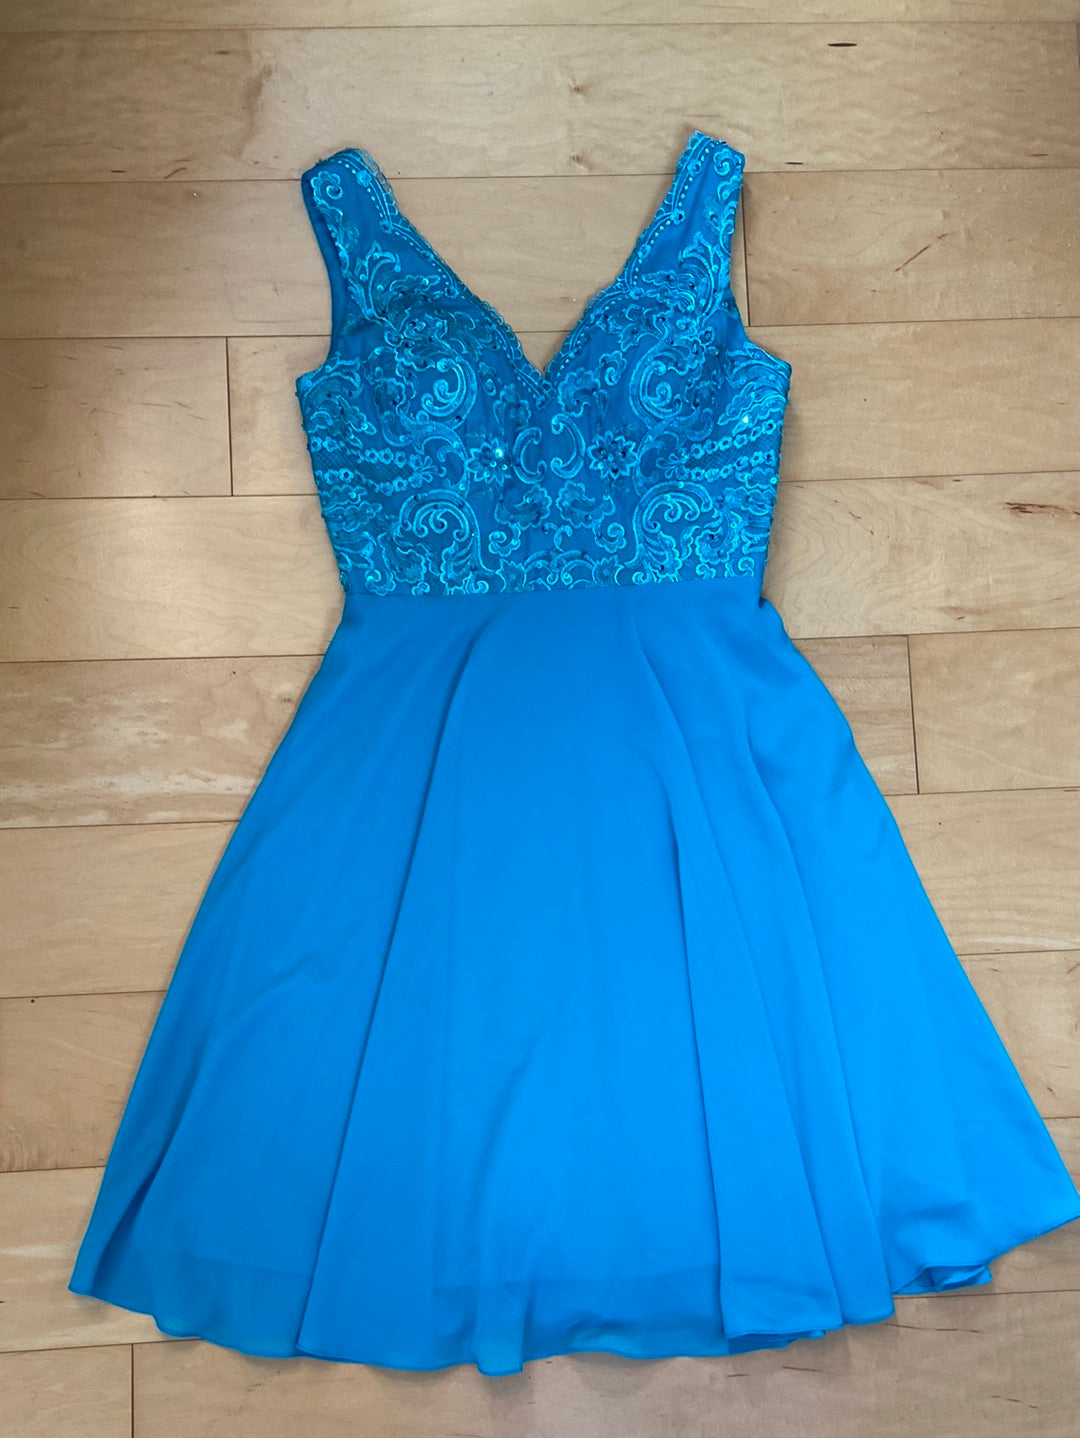 Aqua semi formal dress with detailed beaded bodice with lace and chiffon skirt fit and flare style V-neck sleeveless skirt to the knee